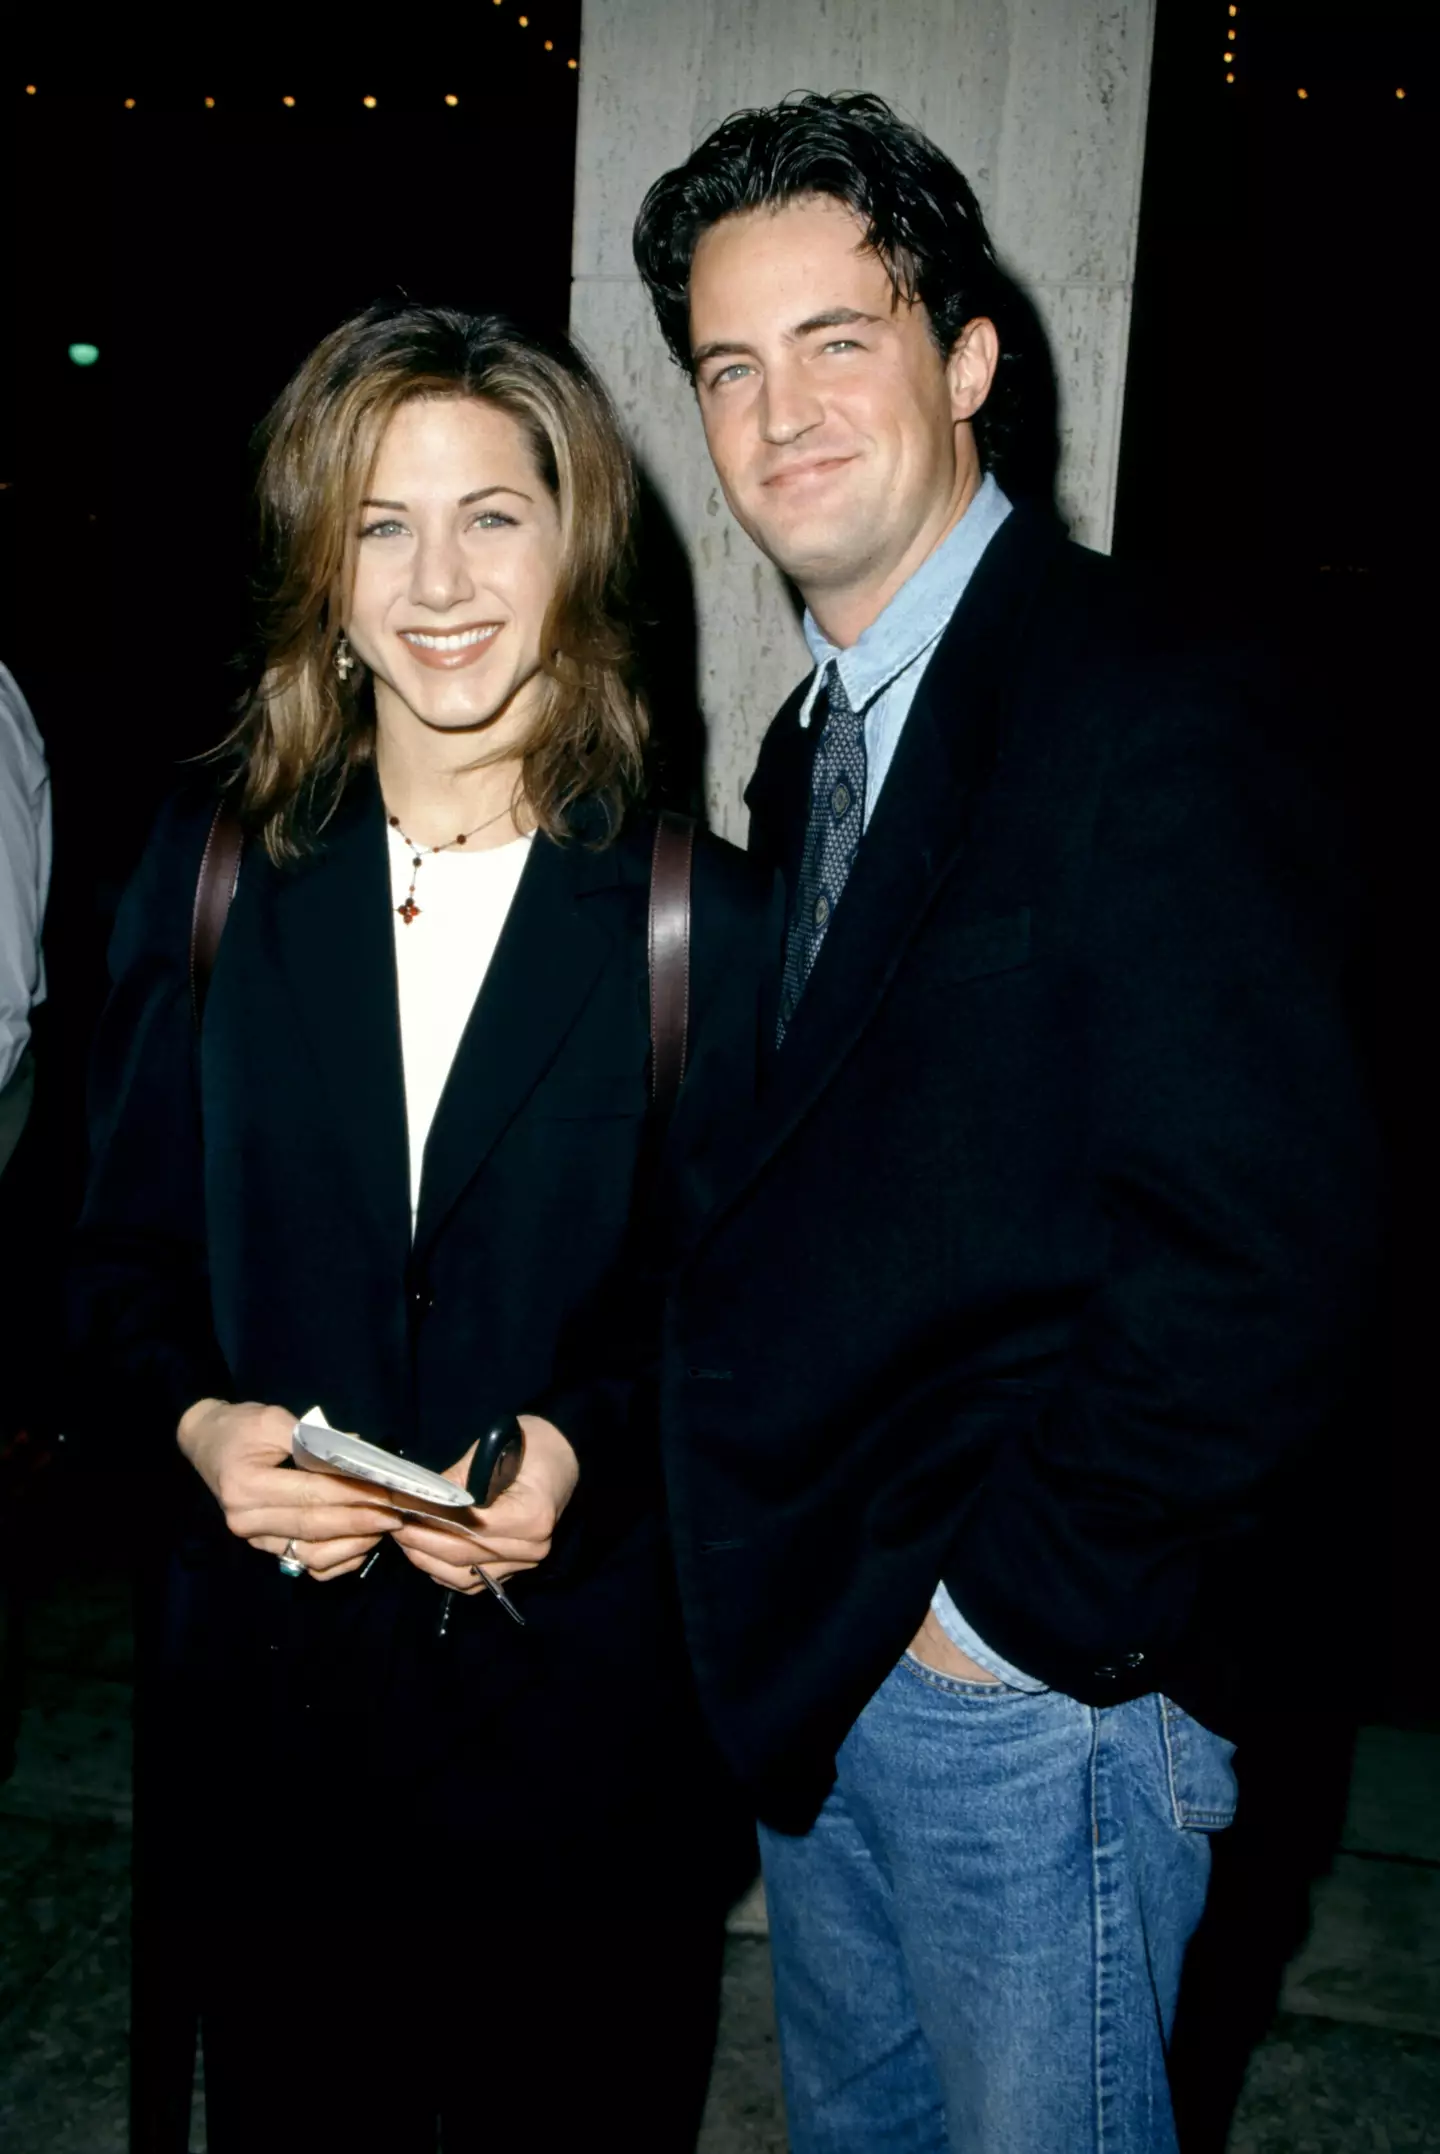 Jennifer Aniston and Matthew Perry pictured together in 1995.